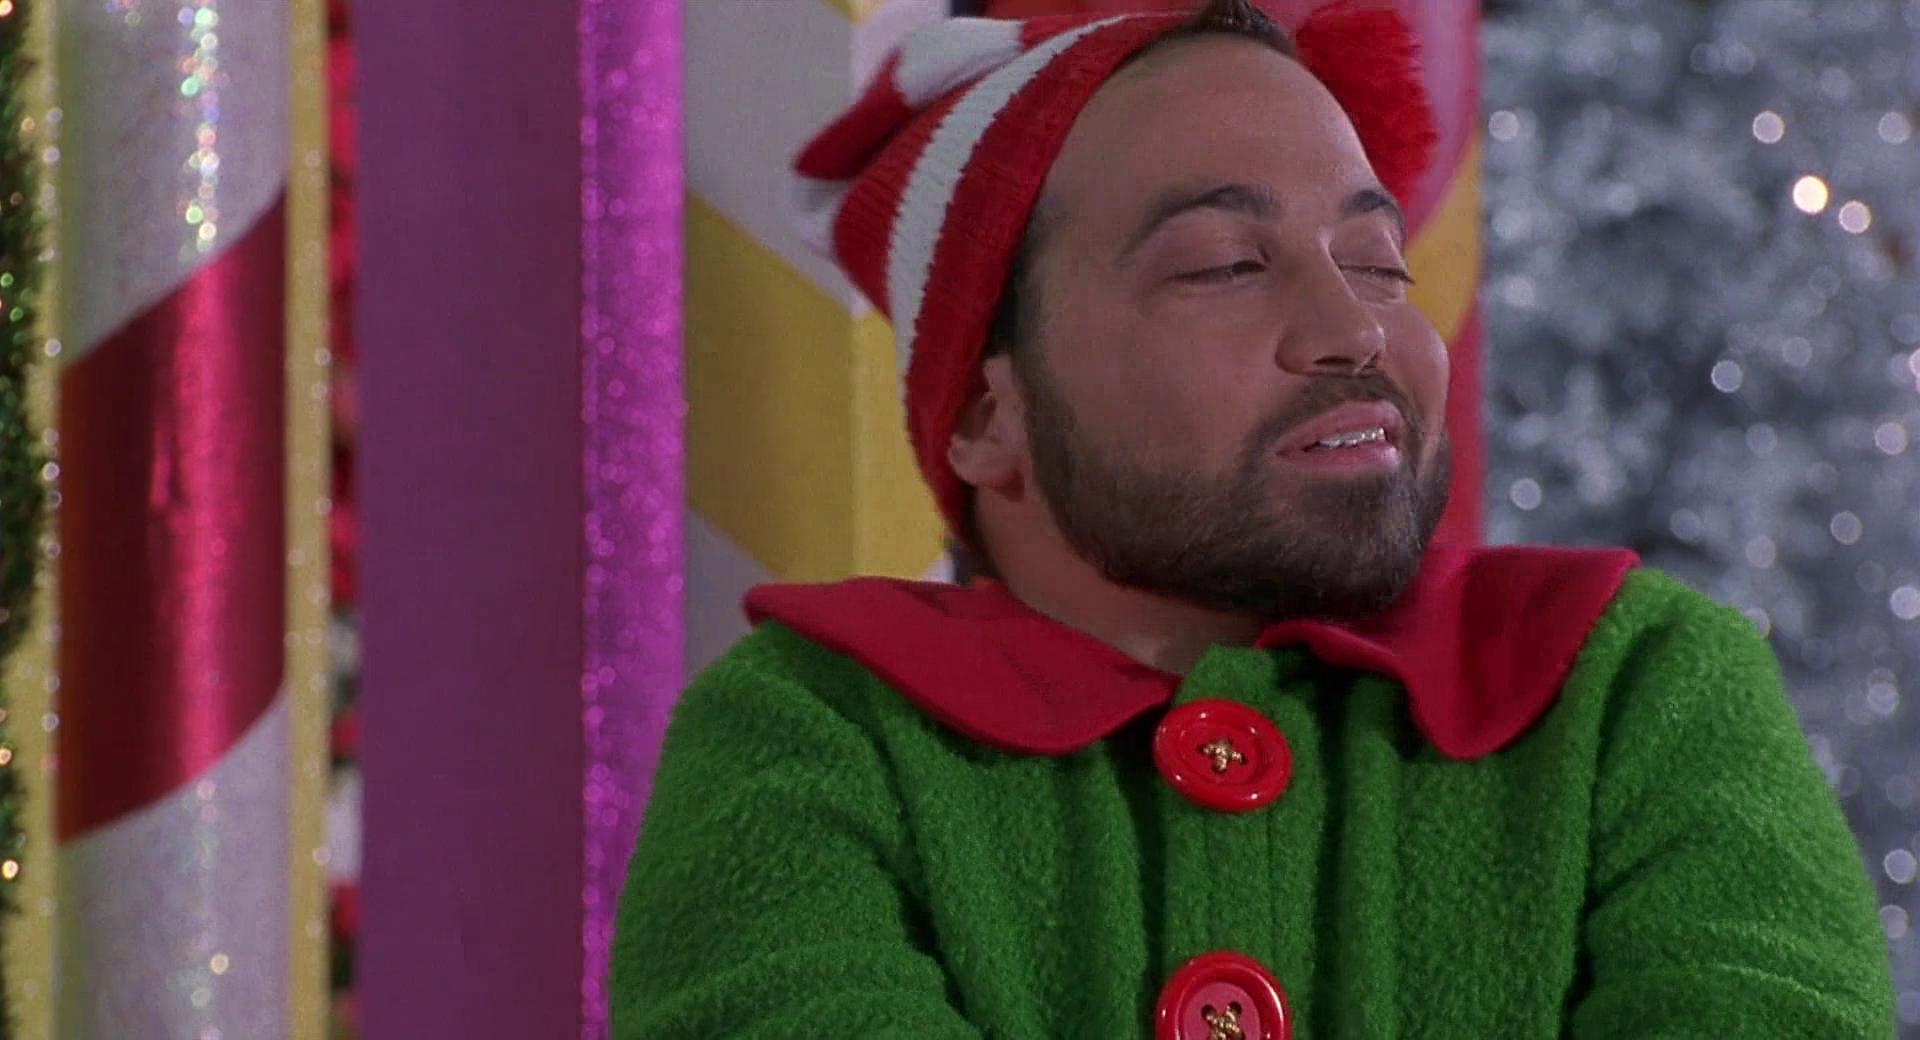 Remember Tony The Elf From ‘Jingle All The Way’? Find Out What He’s Up To Now!